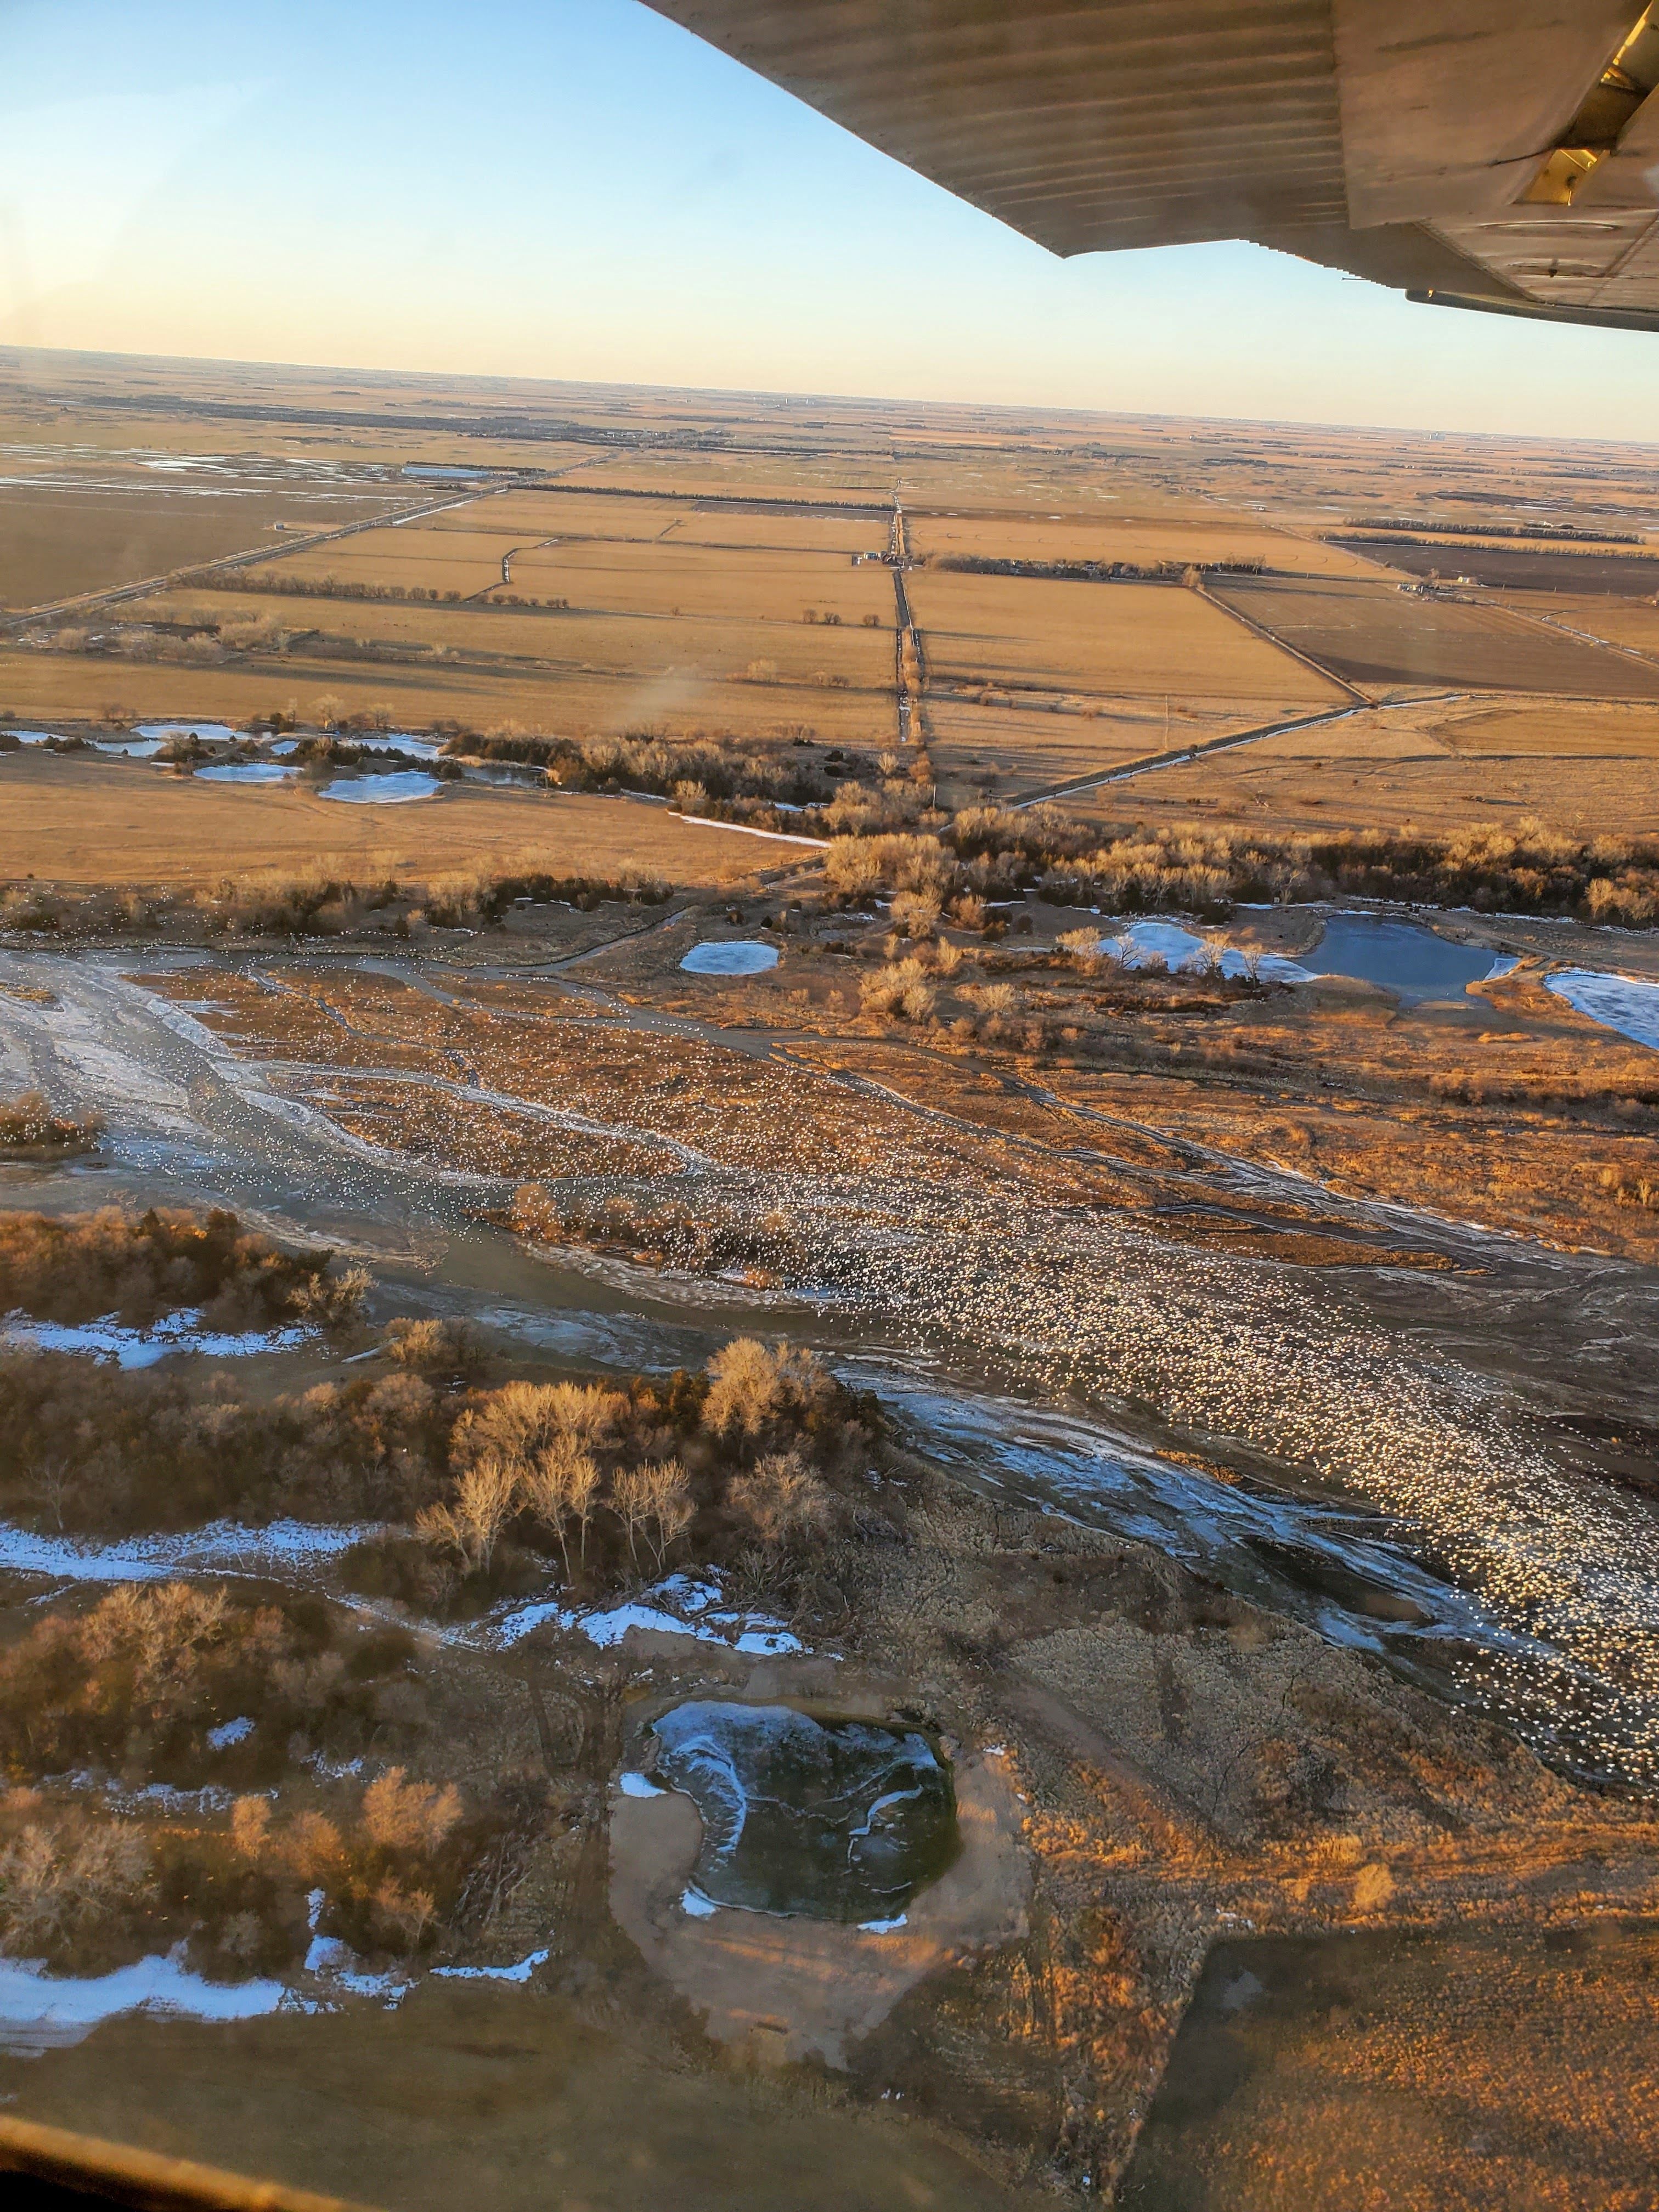 Snapshot of a flock of white geese flying above the river and below the plane during the flight on Monday 2/27/23